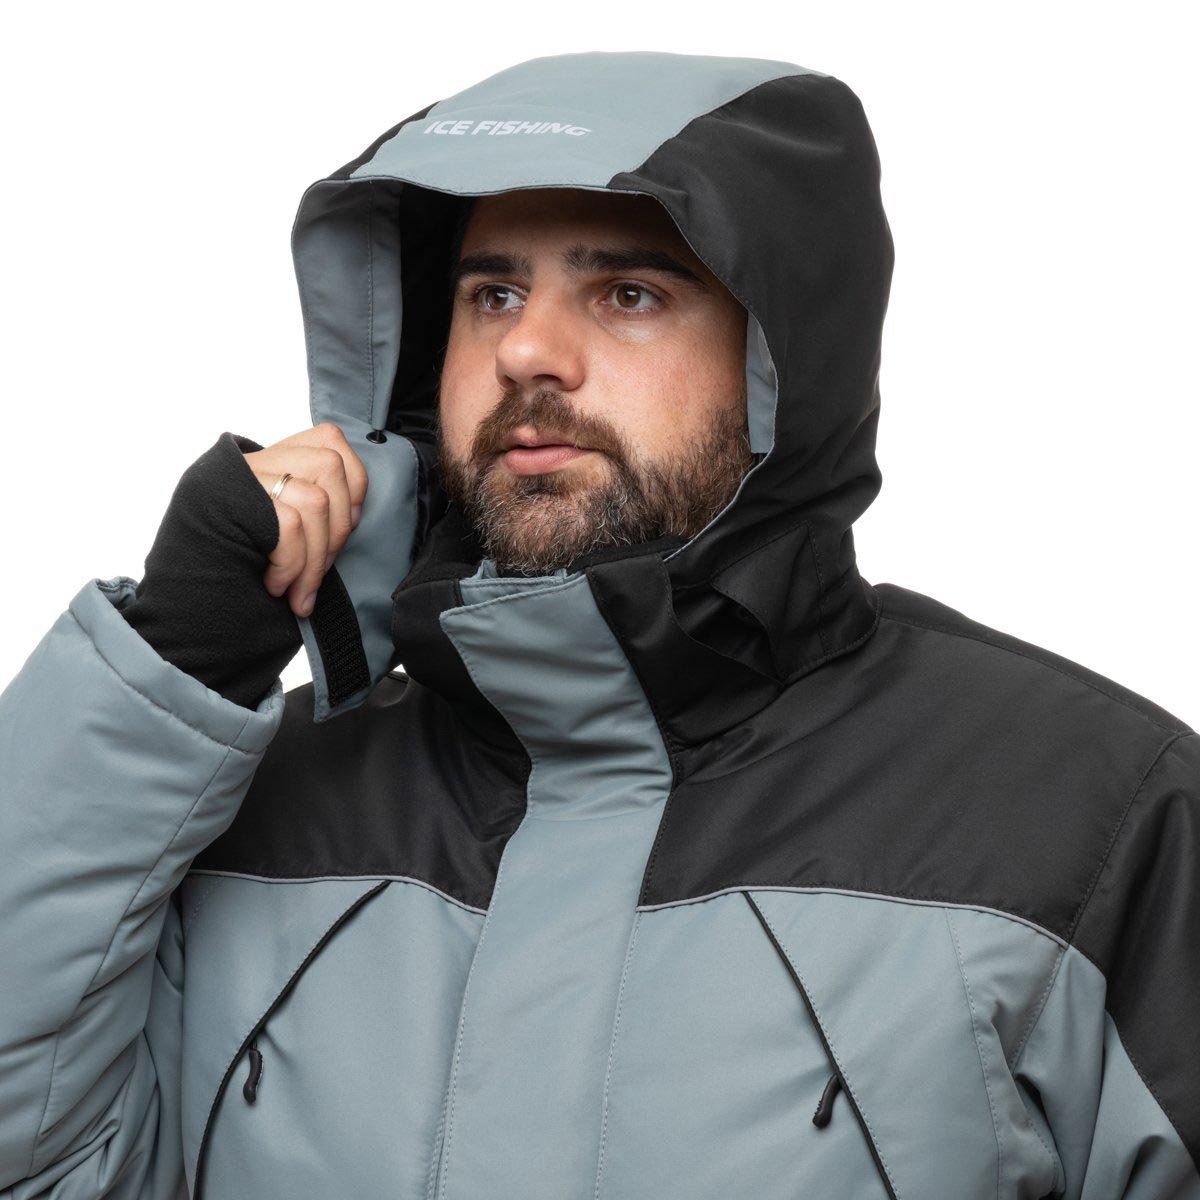 Angler Pro Windproof Winter Jacket and Bibs Set for Men with a comfortable hood